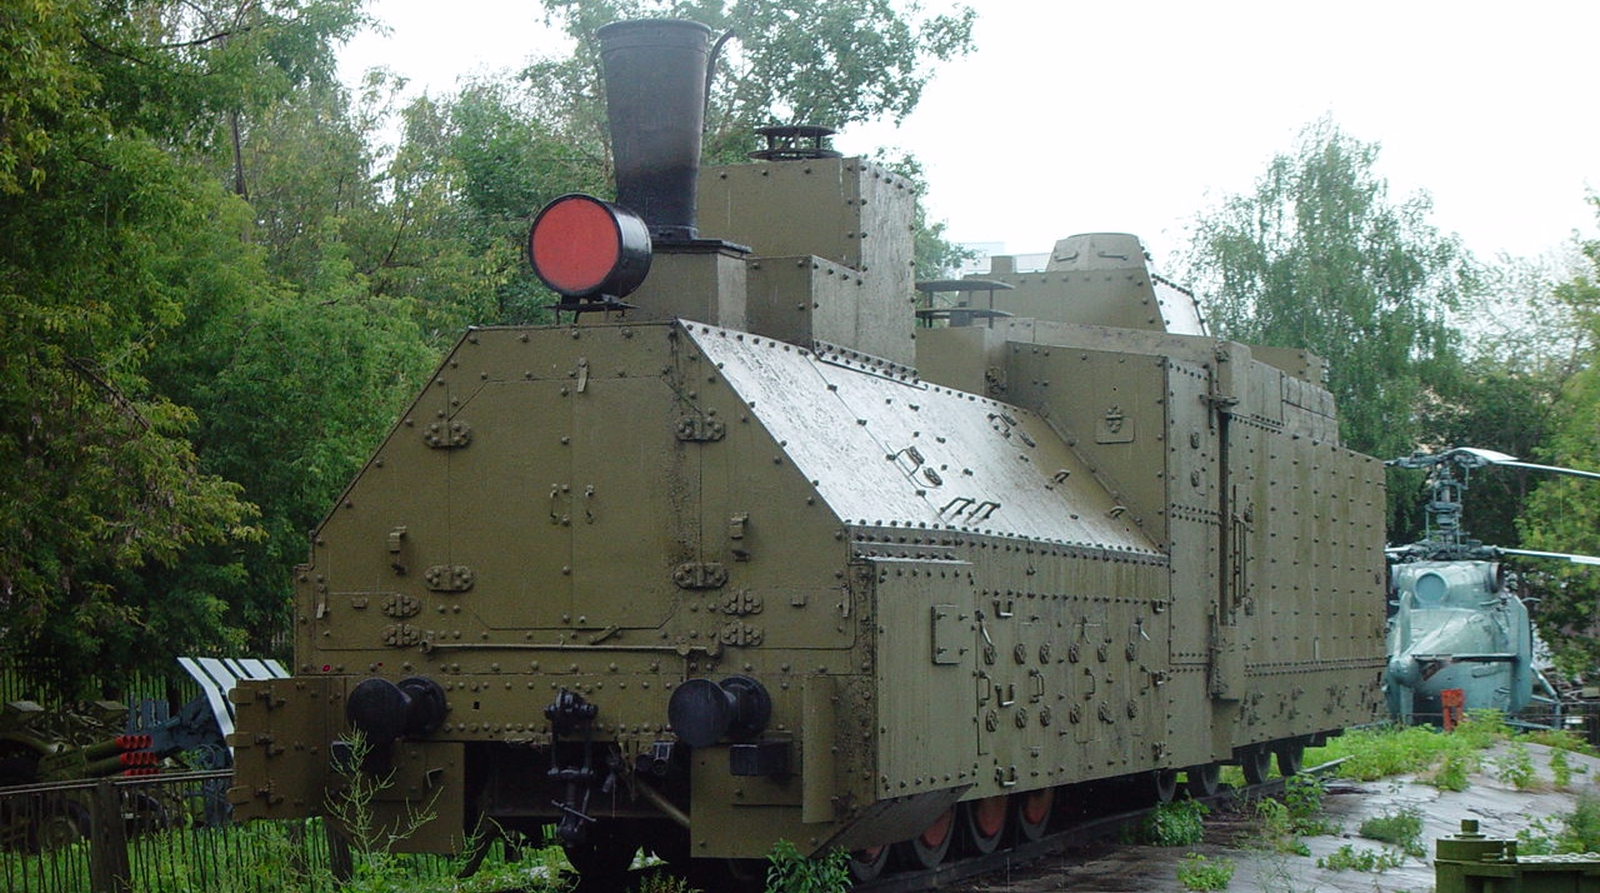 Armoured locomotive O<sub>?</sub> No. 5067 in the Central Museum of the Russian Armed Forces